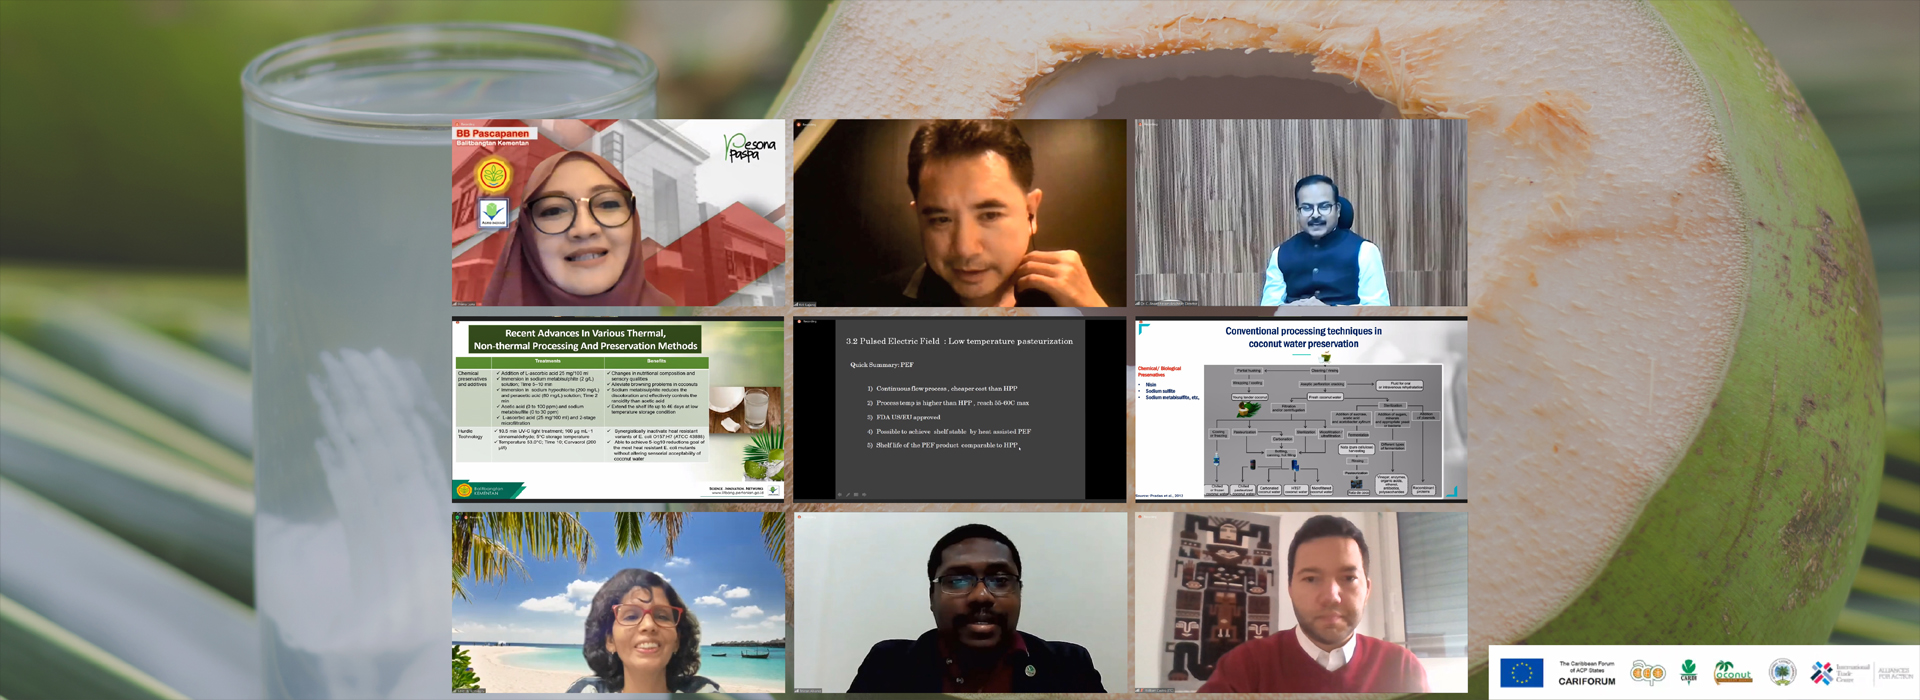 icc-itc-webinar-on-coconut-water-production-processing-and-sustainable-coconut-water-value-chain20211211192903.jpg